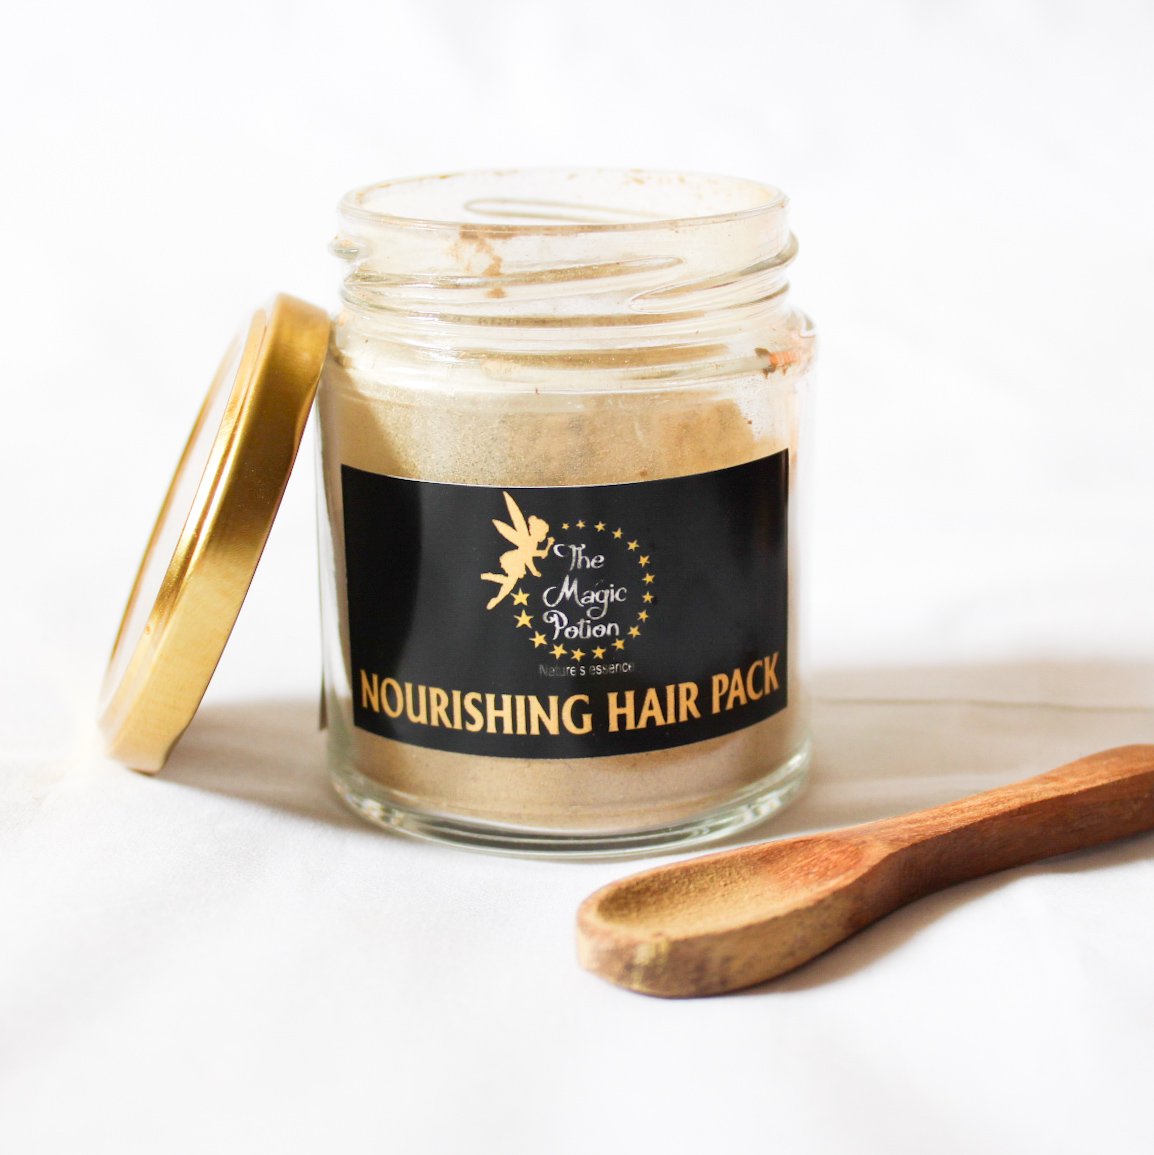 The Magic Potion Nourishing Hair Pack Review